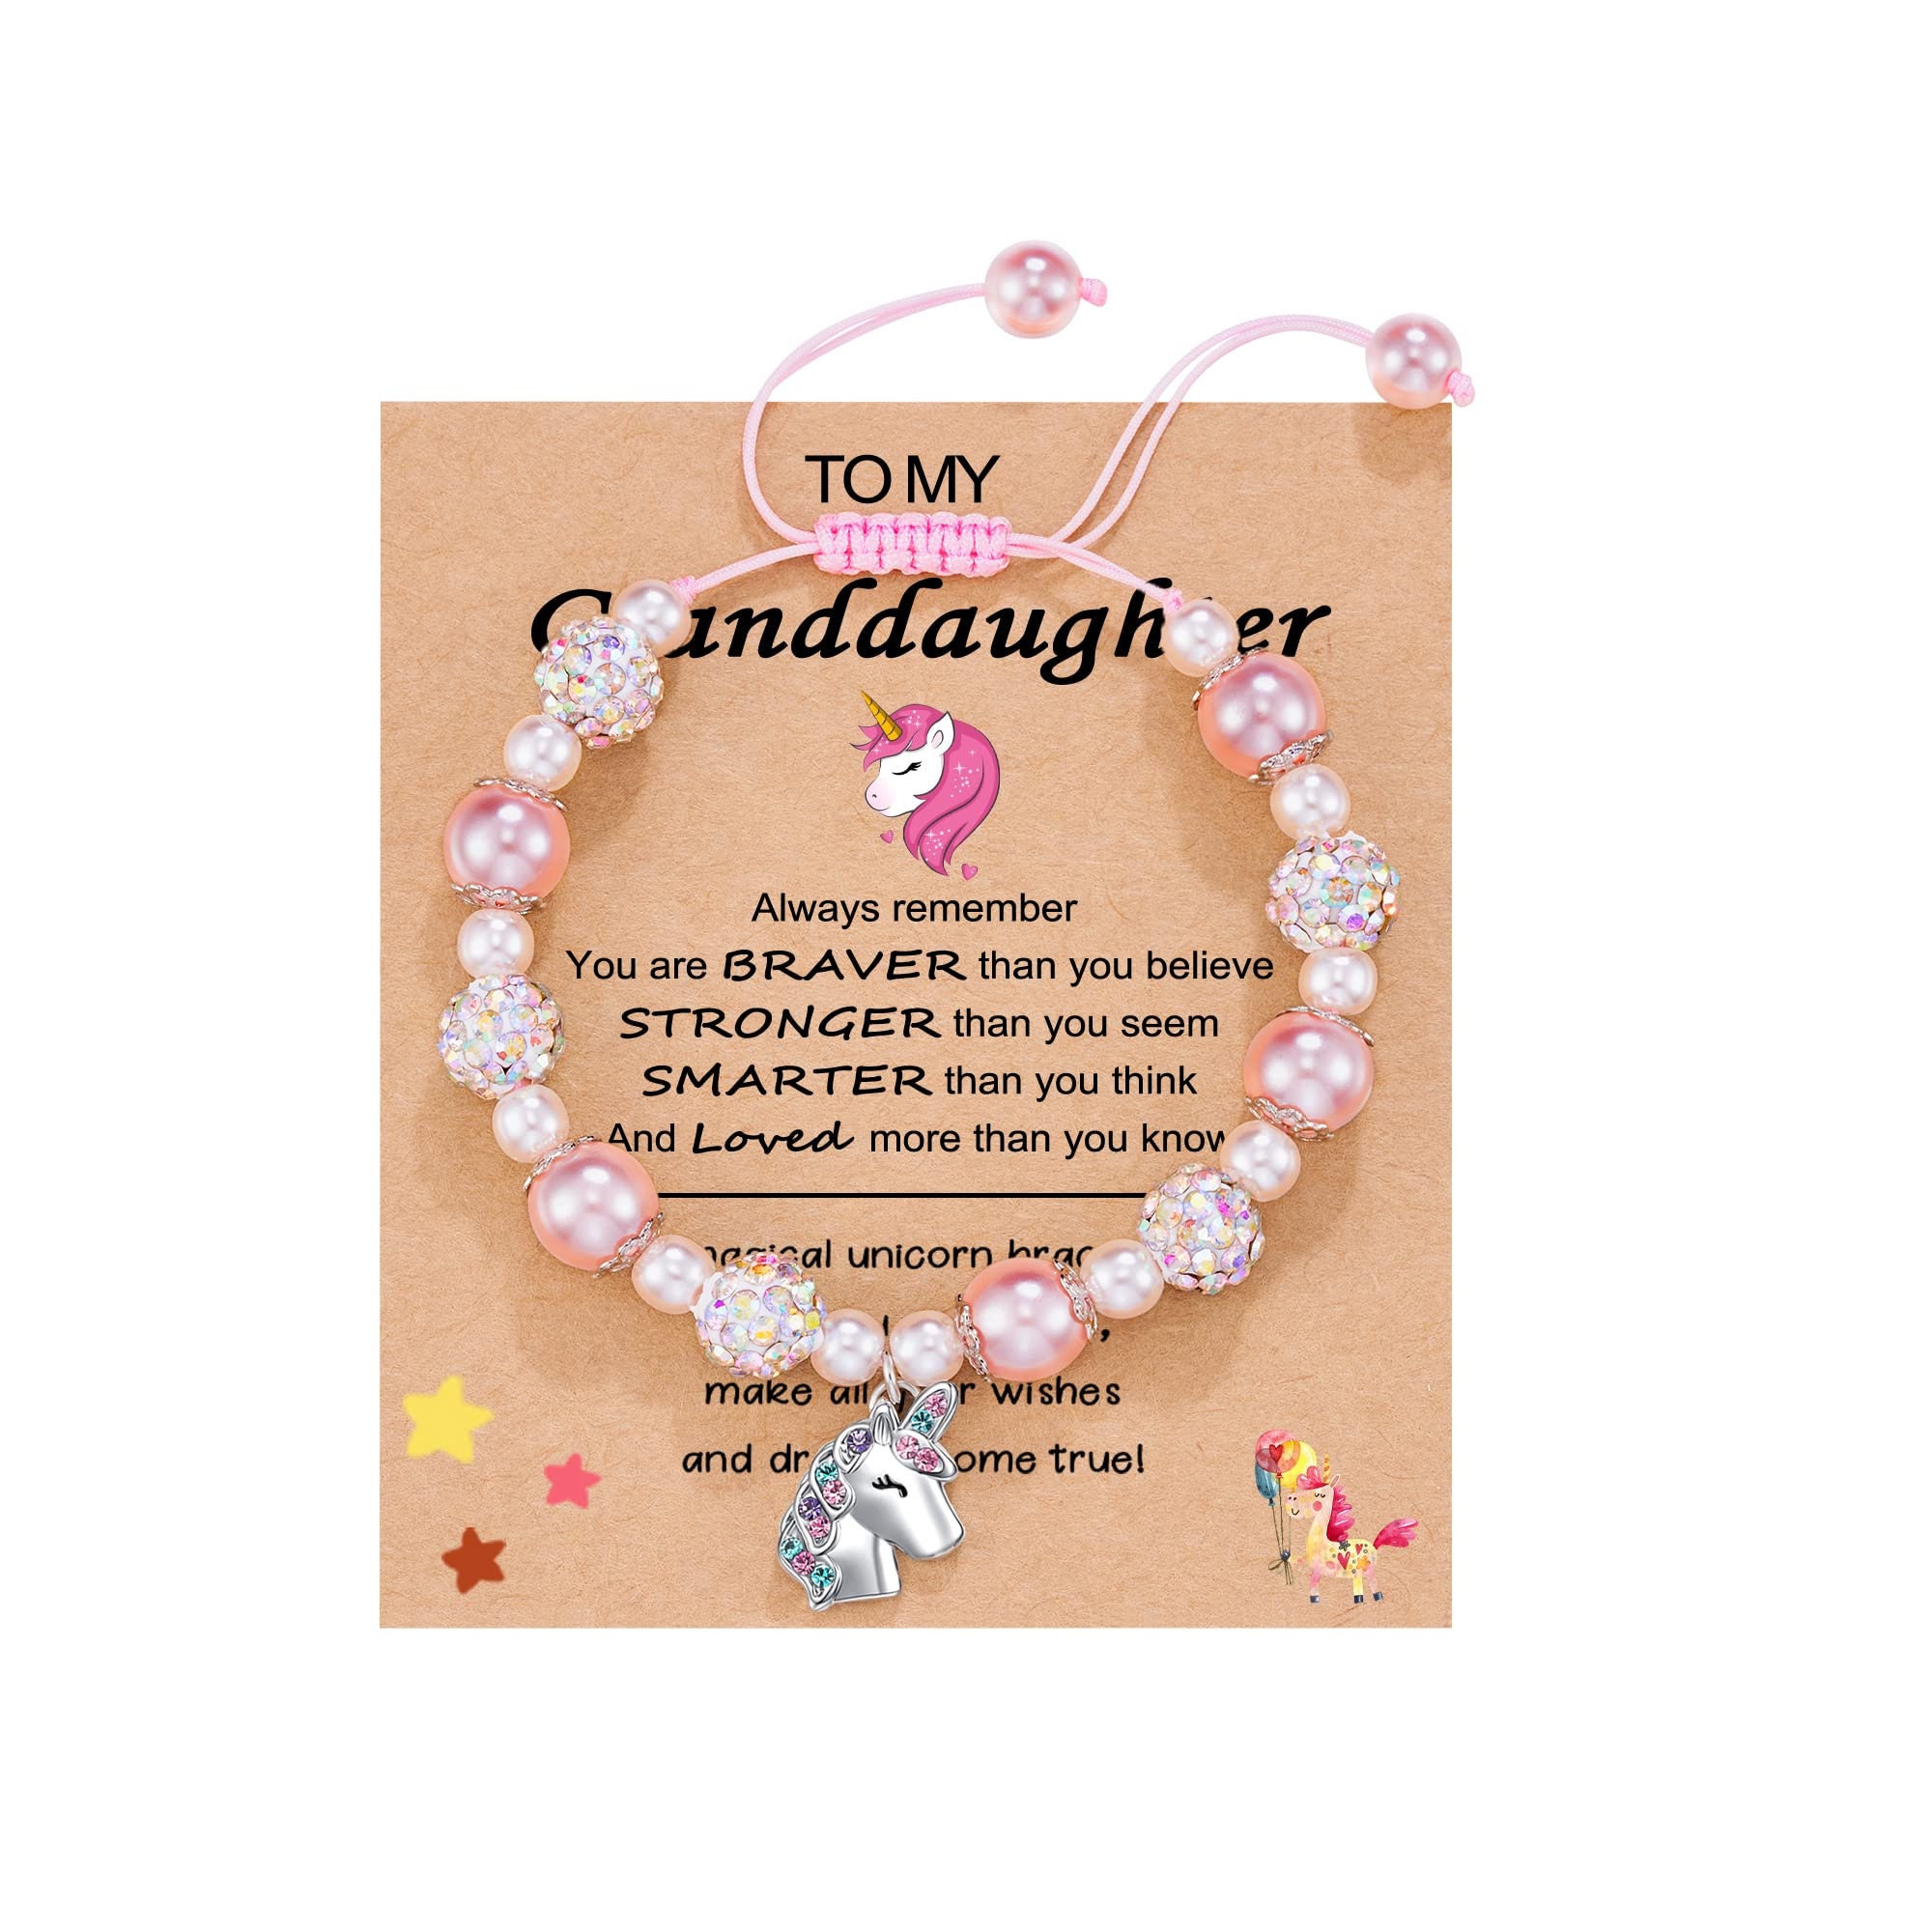 Granddaughter Gifts, Unicorns Jewelry Gifts for Little Girls Jewelry Ages 6-8 8-12 10-12 Year Old Girl Gifts Girls' Christmas Easter Kindergarten